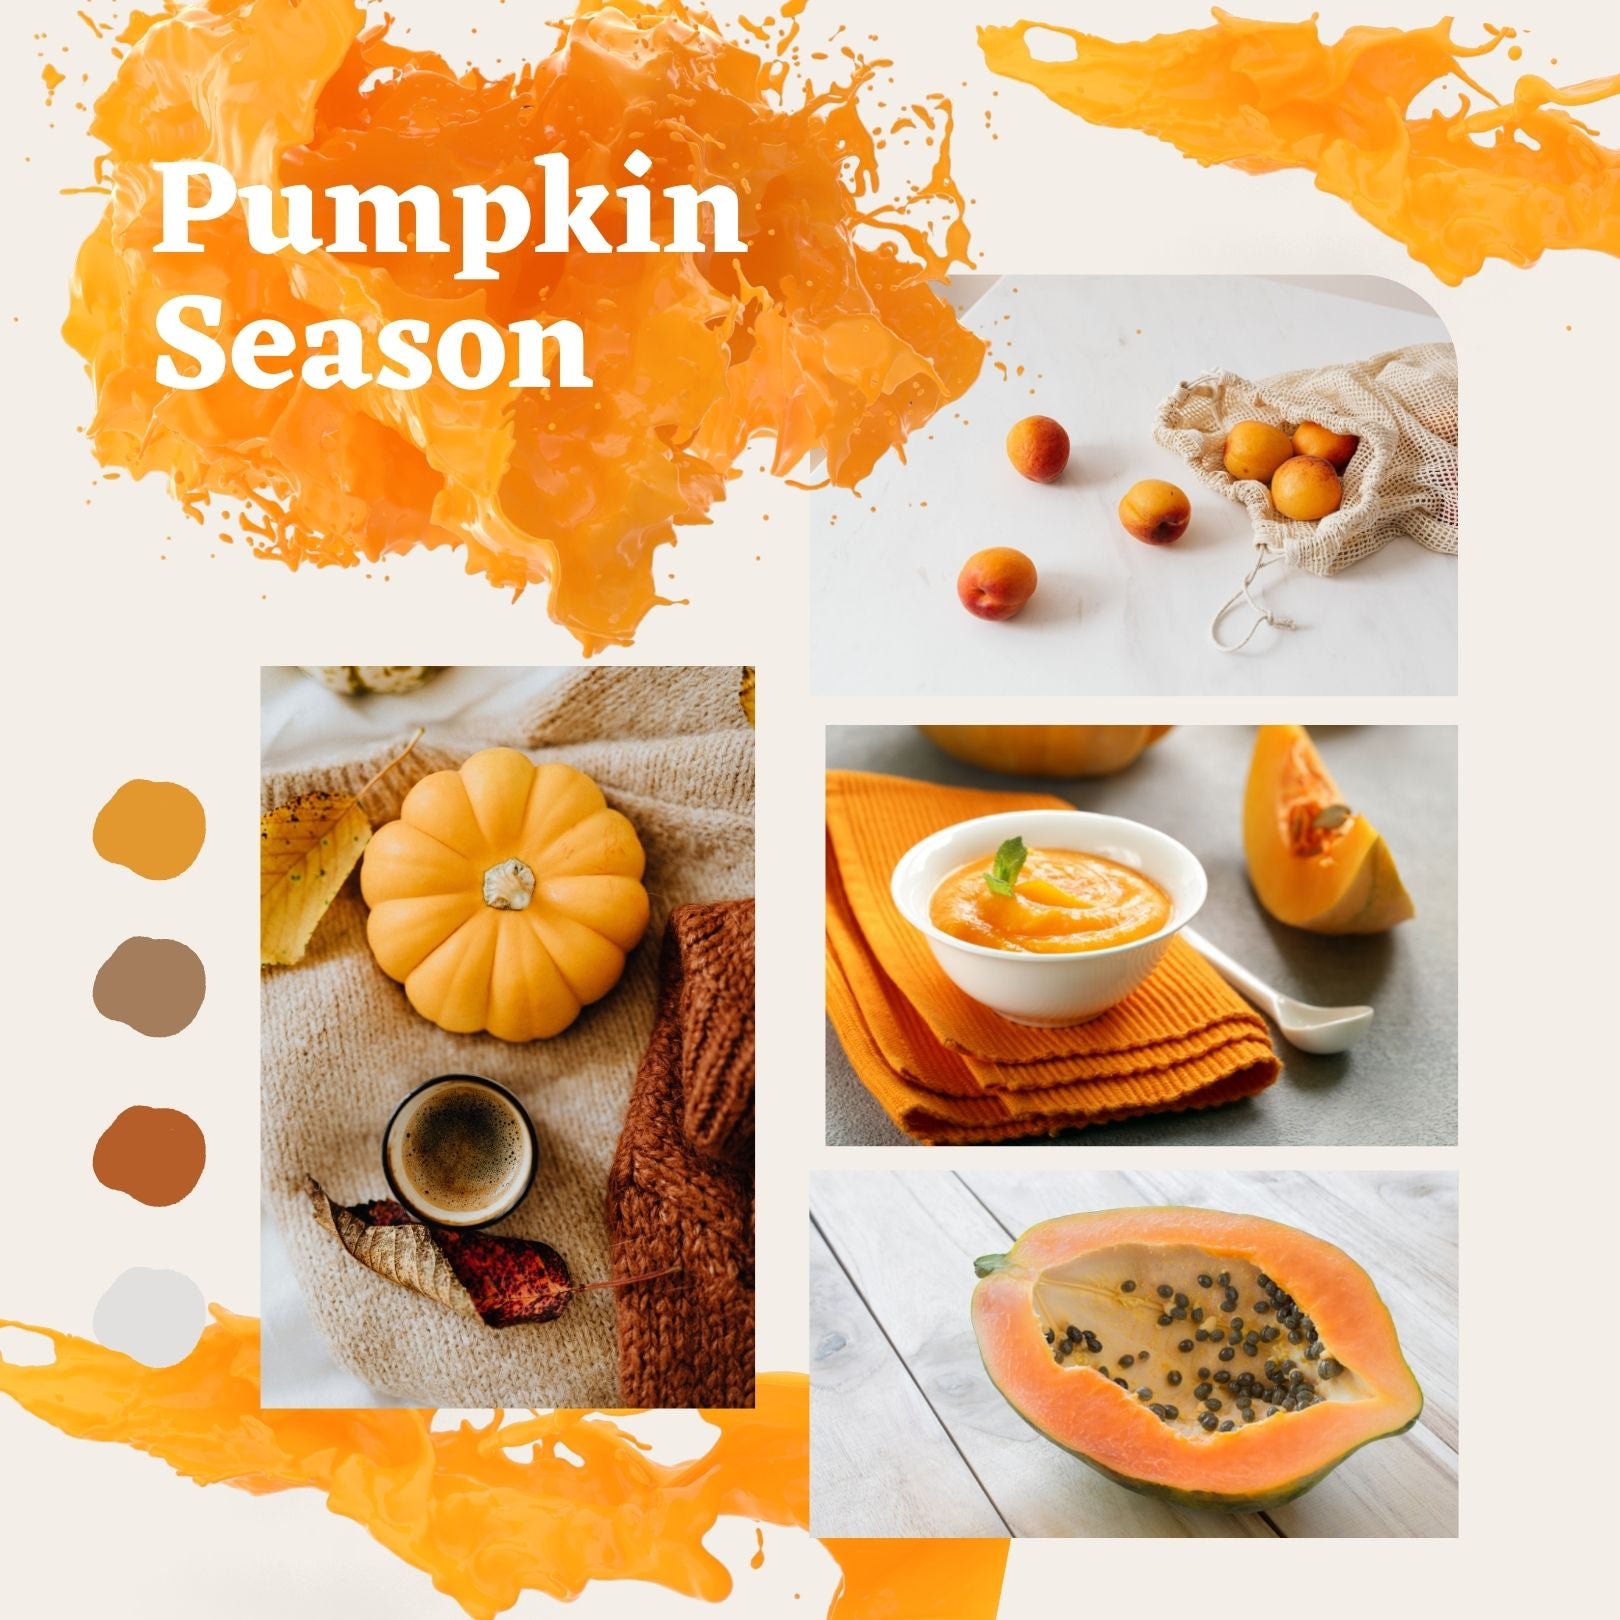 Pumpkin season with pumpkin puree for facial skin care by Vermont Lavender